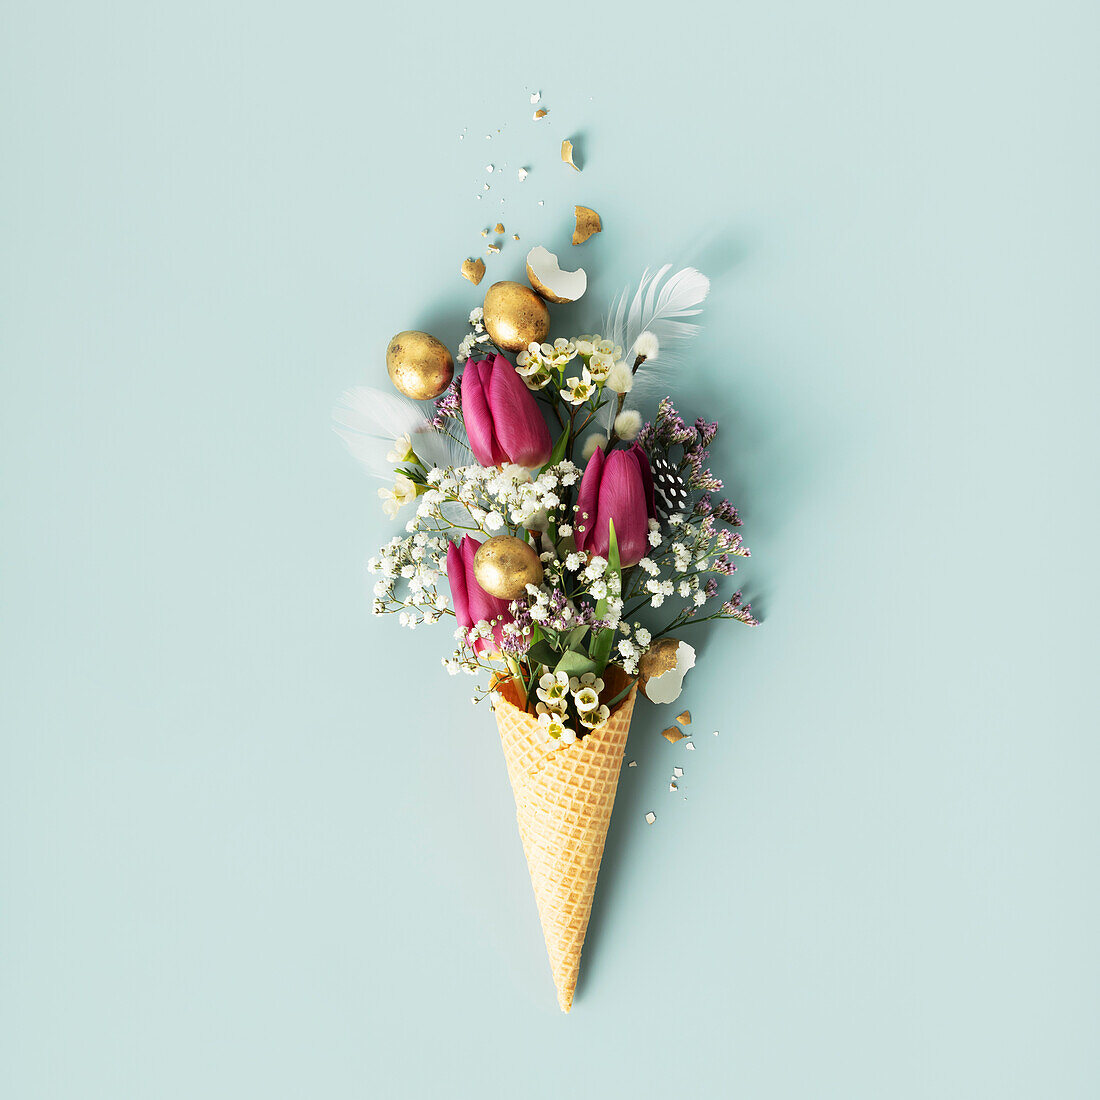 Easter composition. Ice cream cone with beautiful flowers and golden Easter eggs laid flat on a blue background